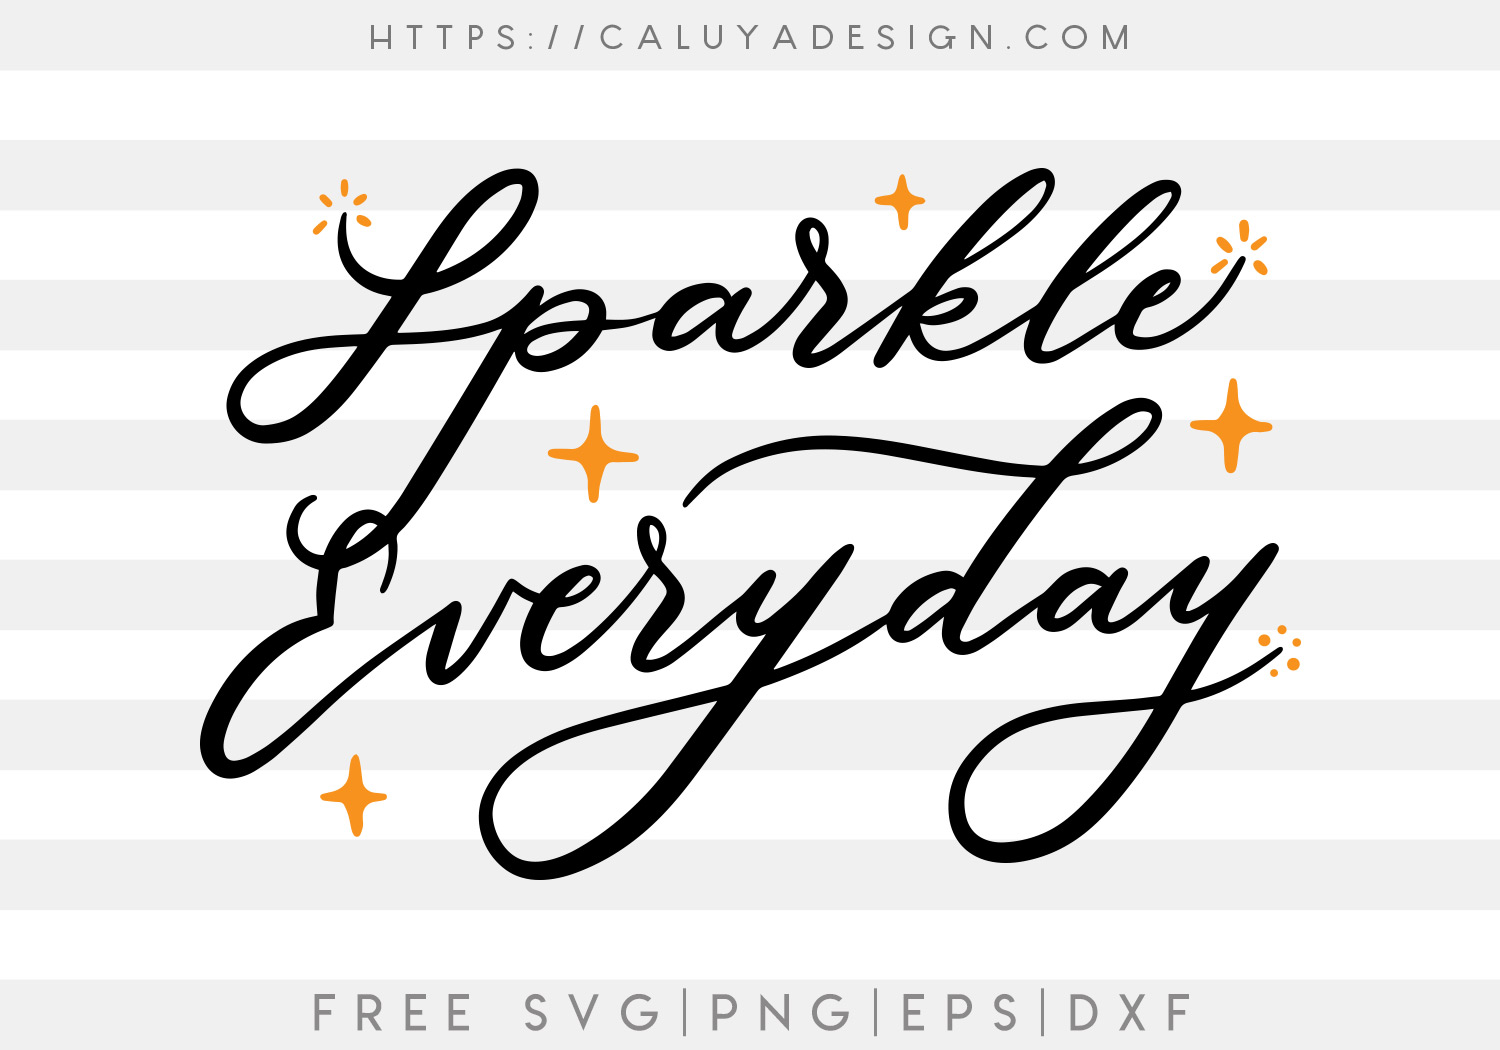 Sparkle Everyday SVG, PNG, EPS & DXF